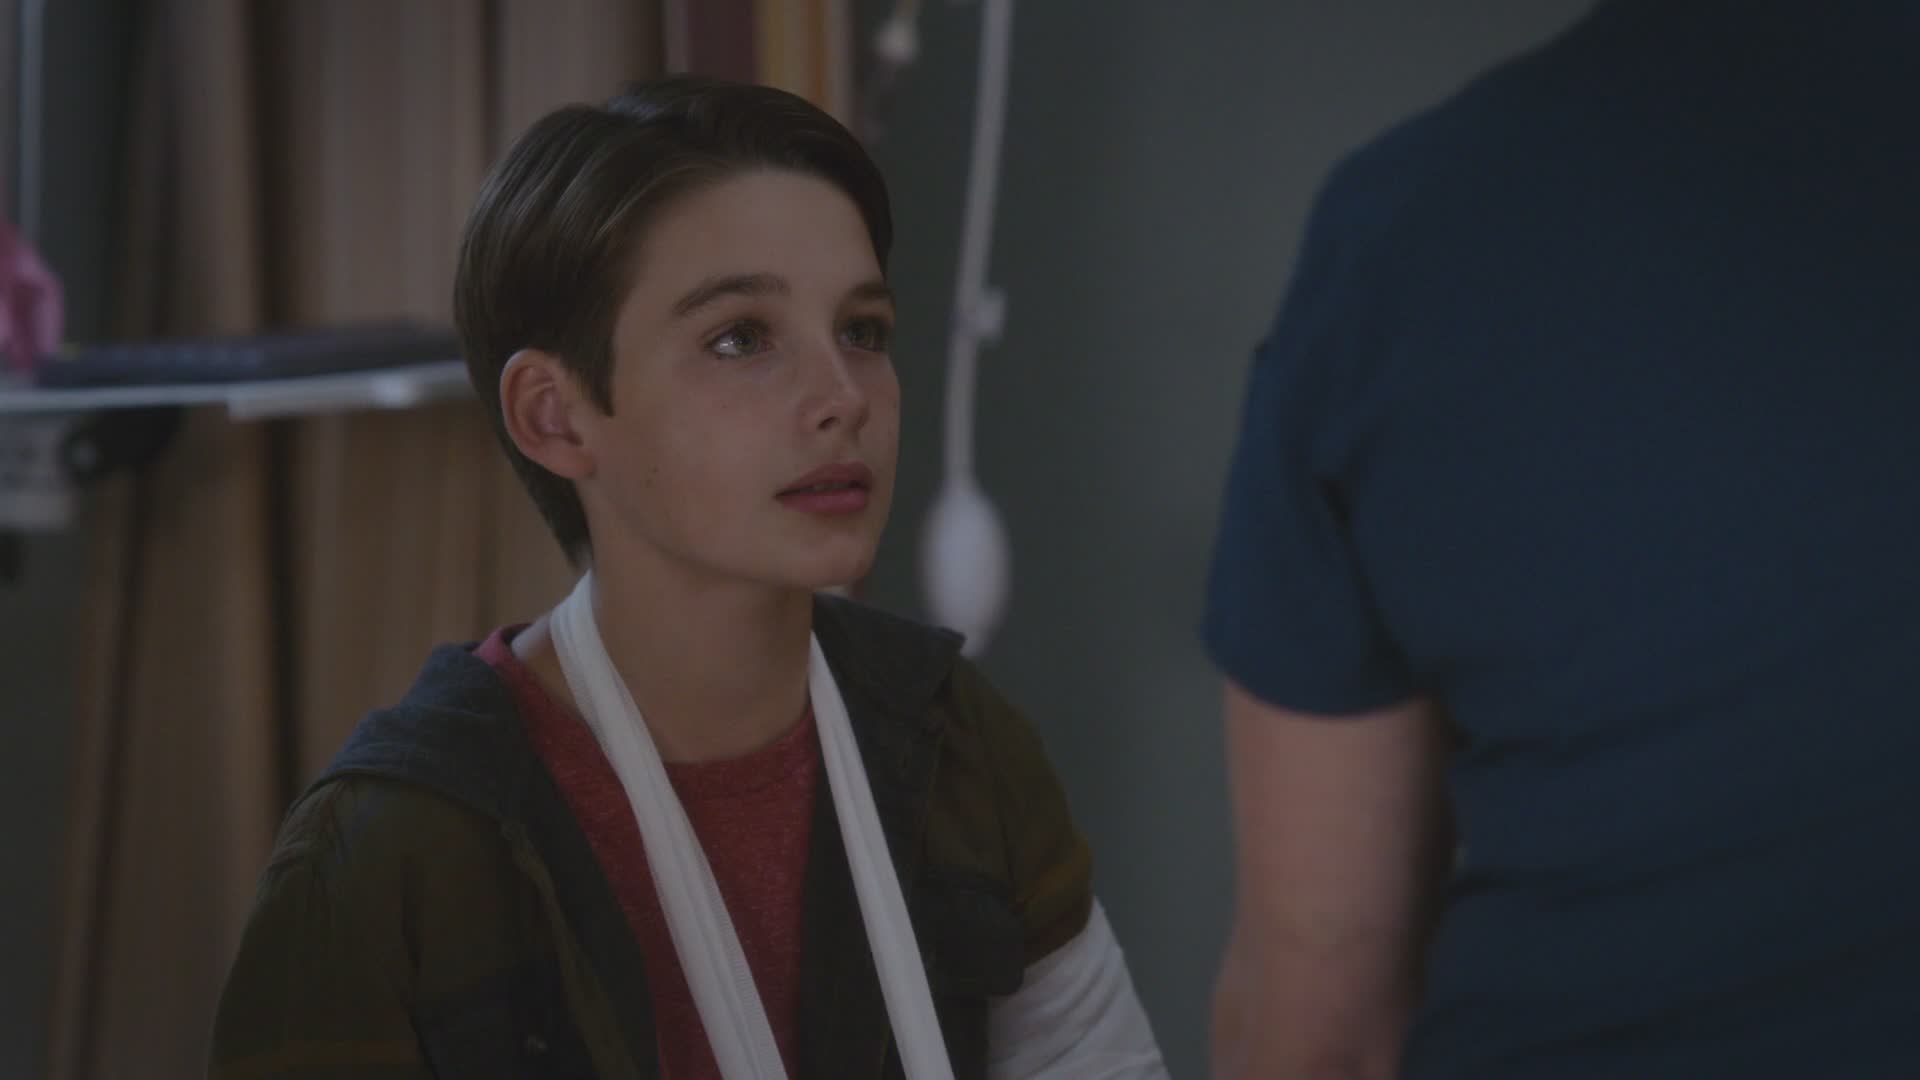 Dylan Kingwell in The Good Doctor